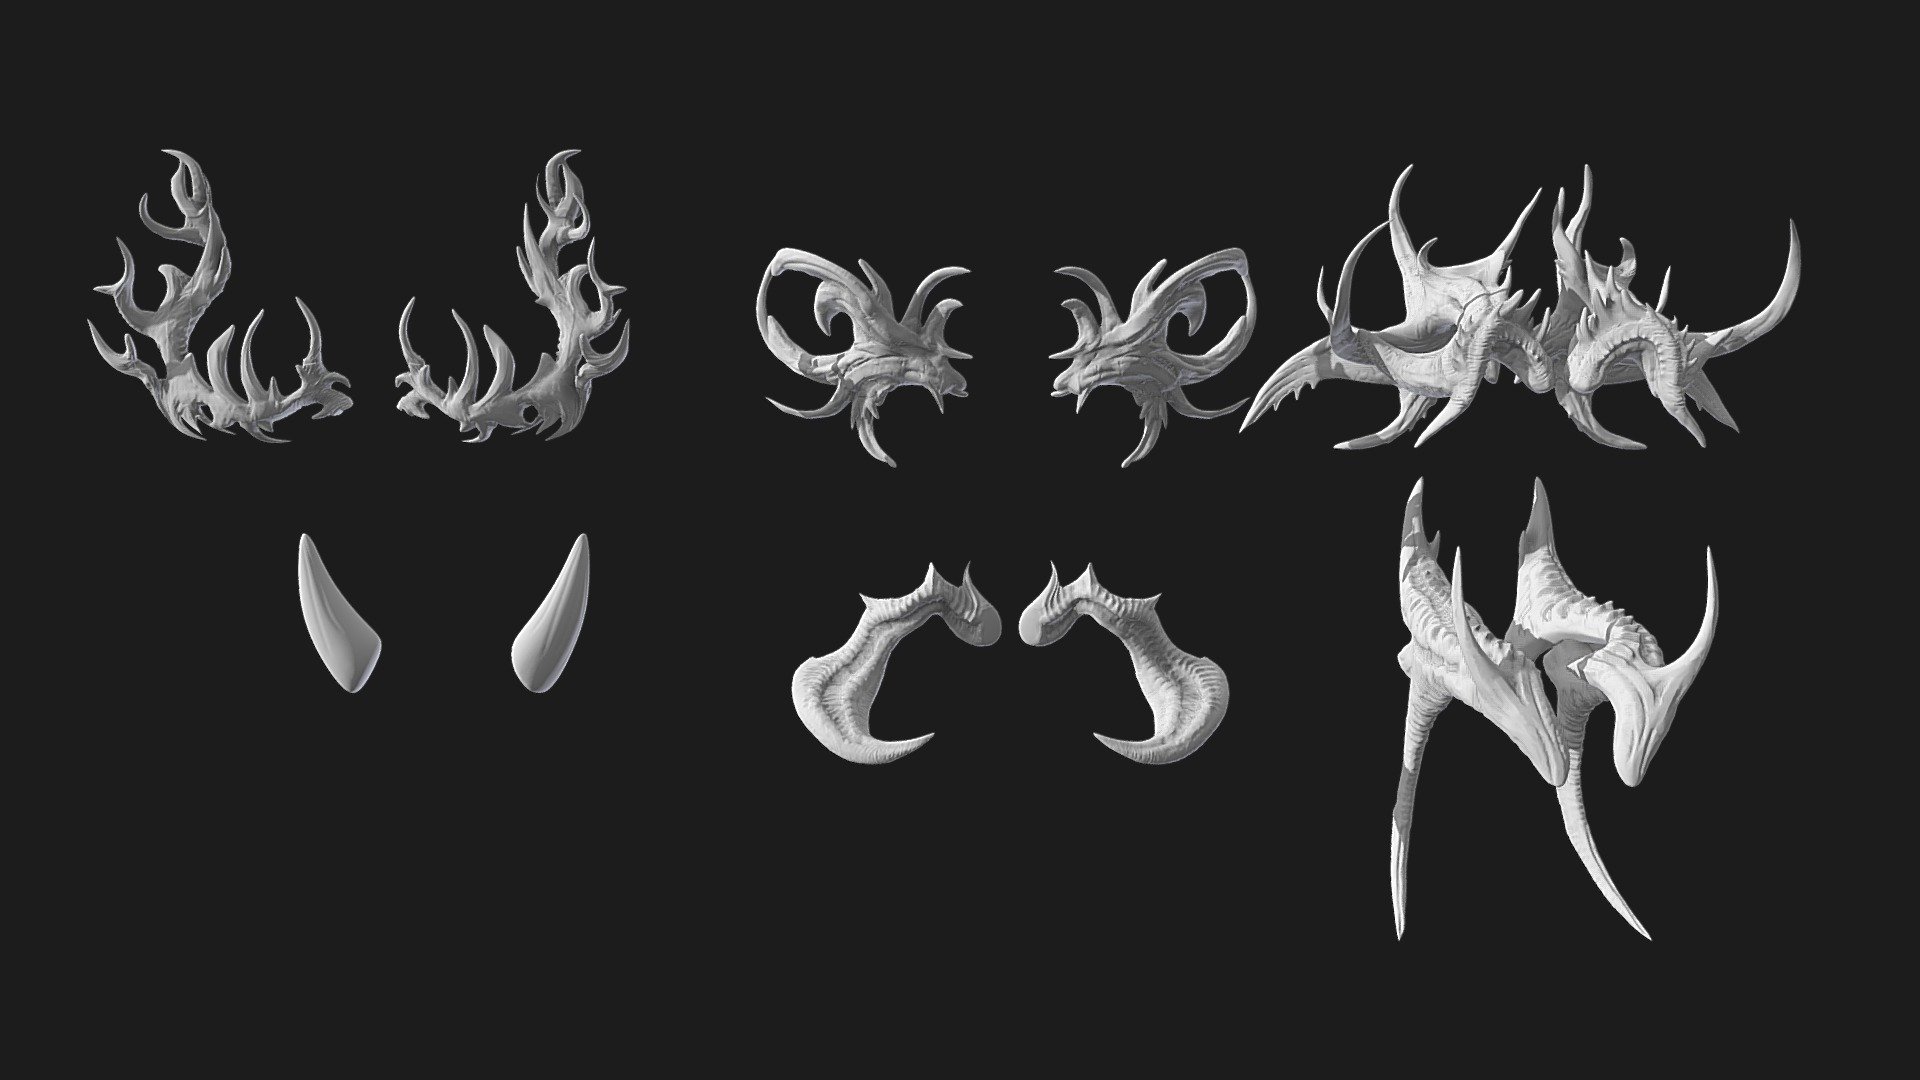 High resolution pack of 5 different horn meshes + 1 free set that you can use for your character! Fully detailed and decimated. FBX format.

Horn Pack 4: https://sketchfab.com/3d-models/horn-pack-4-df780943e61f4de995b5c51a489ced0c - Horn Pack 5 - Buy Royalty Free 3D model by Alexandria Maharaj (@Thedovahtamer) 3d model